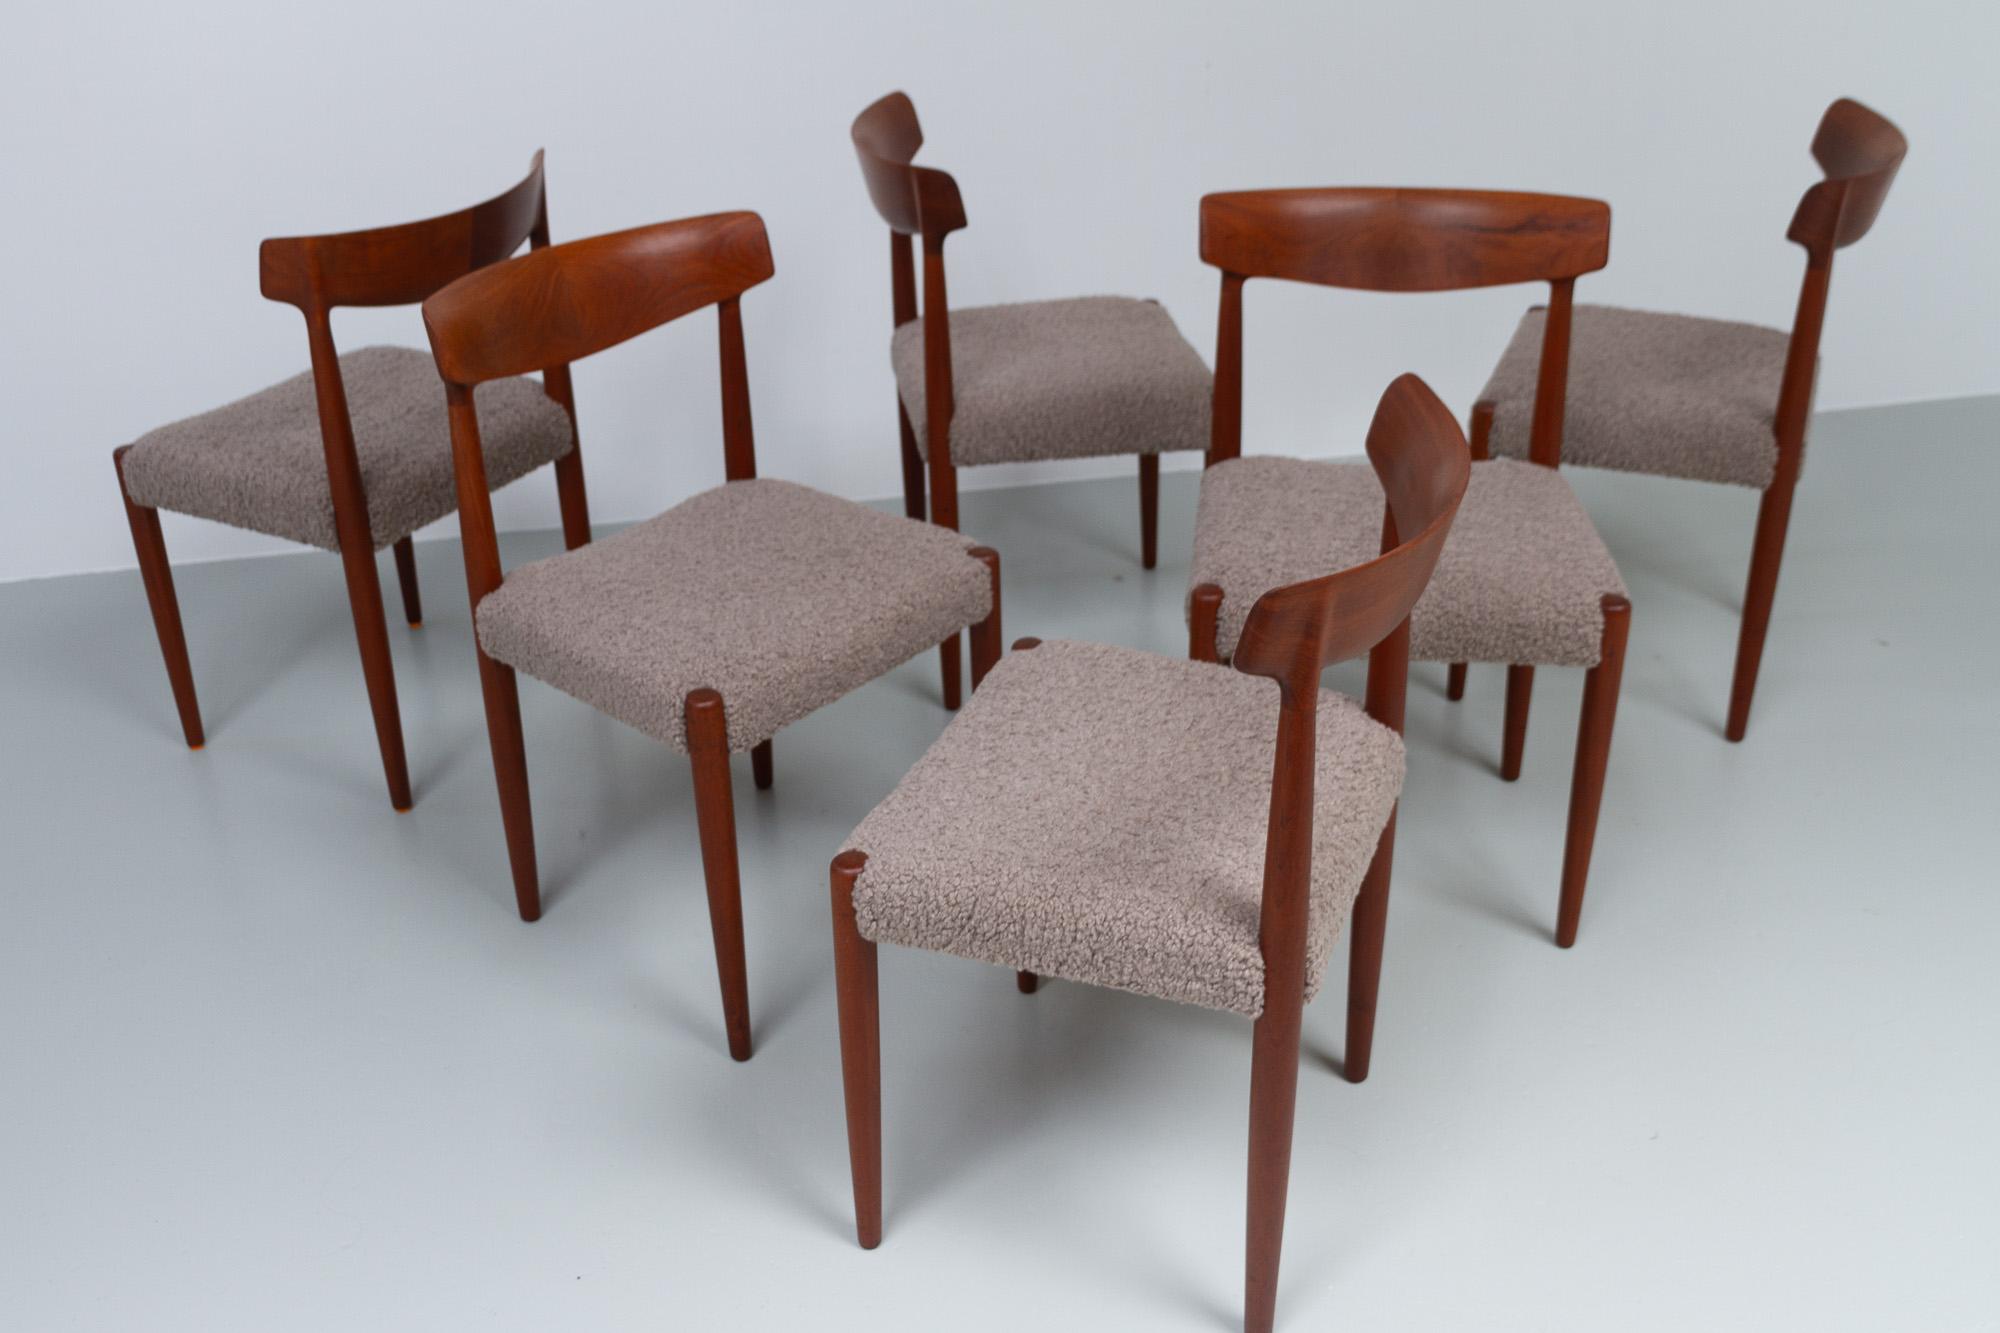 Danish Modern Teak Dining Chairs by Knud Færch for Slagelse, 1960s. Set of 6. For Sale 5